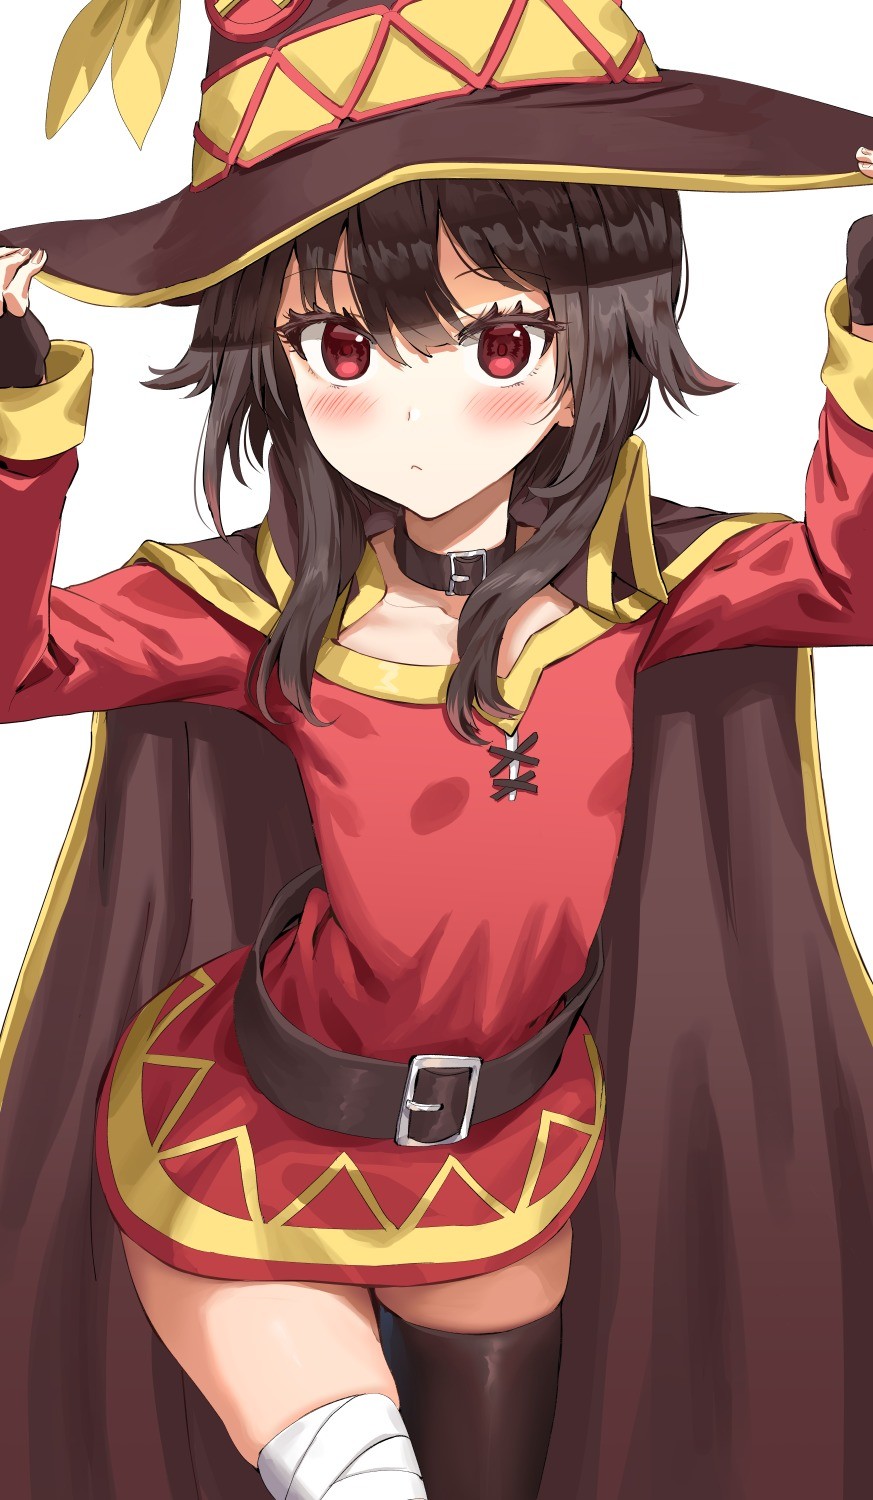 Daily Megu - 993: Big Hat. join list: DailySplosion (851 subs)Mention History Source: .. god i love megumin